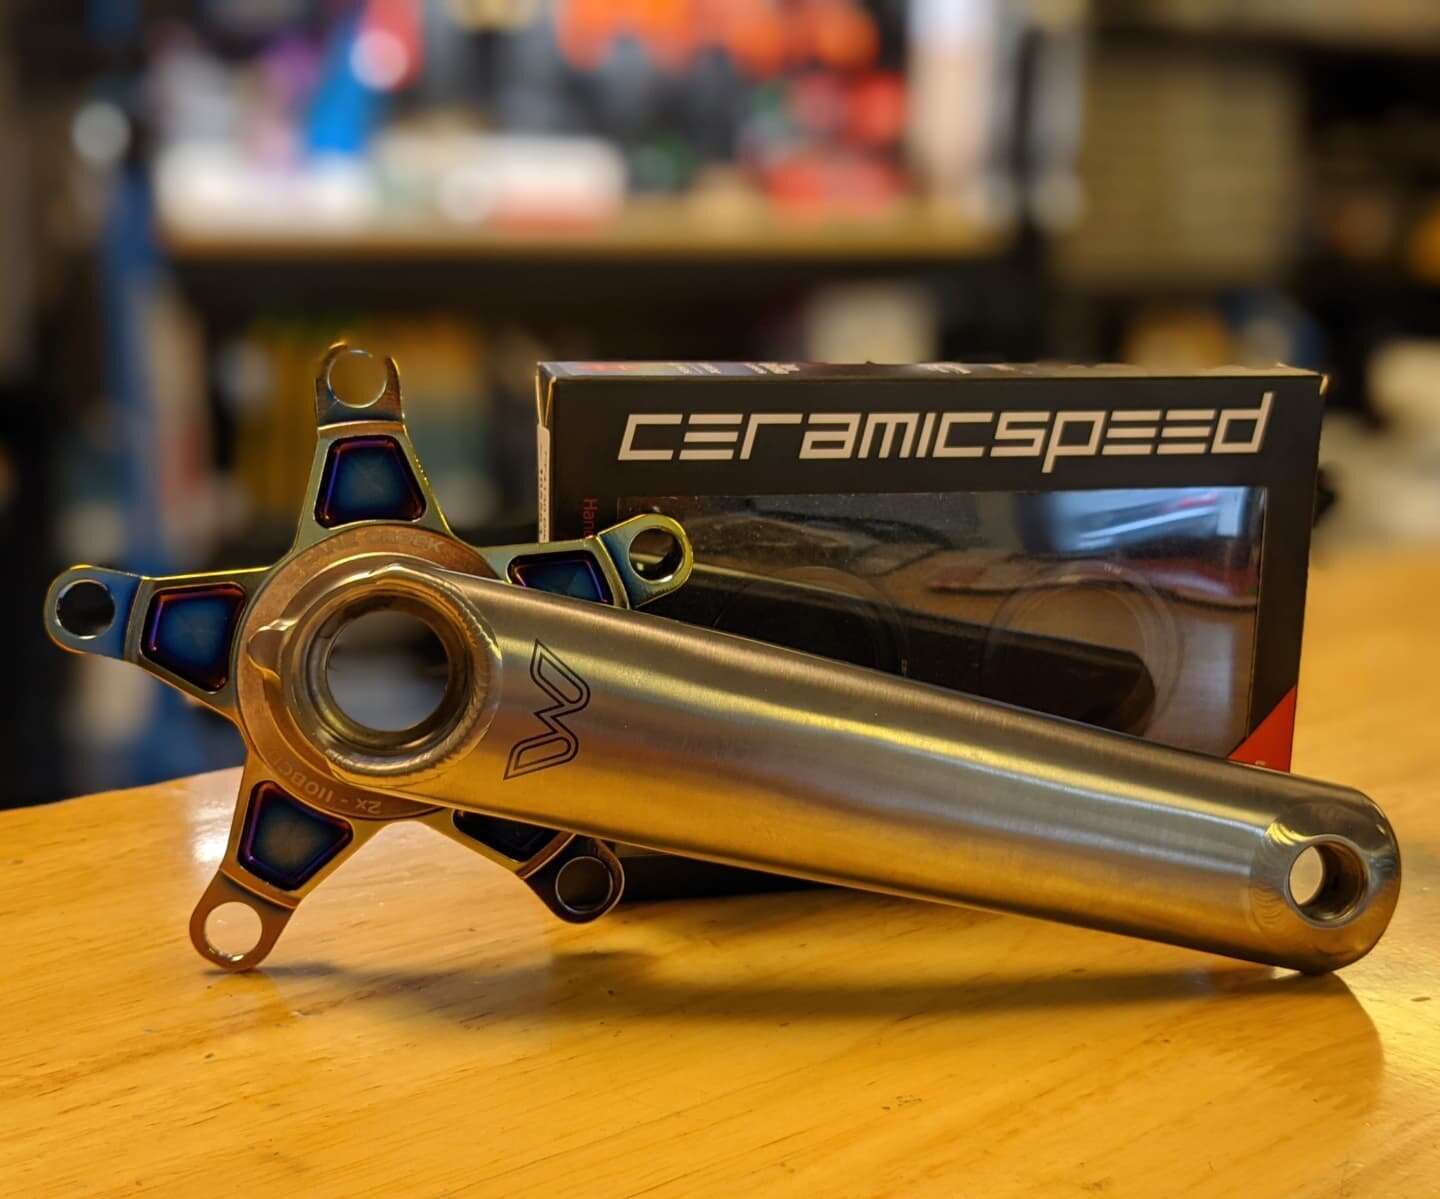 One of the more economical choices for a crank and BB. Going to be quite the build...

#RADcycleworks #rideallday #highend #bicycle #builds #design #consultation #certifiedRAD #titanium #eewings #ceramicspeed #goallin #canecreek #oilslick